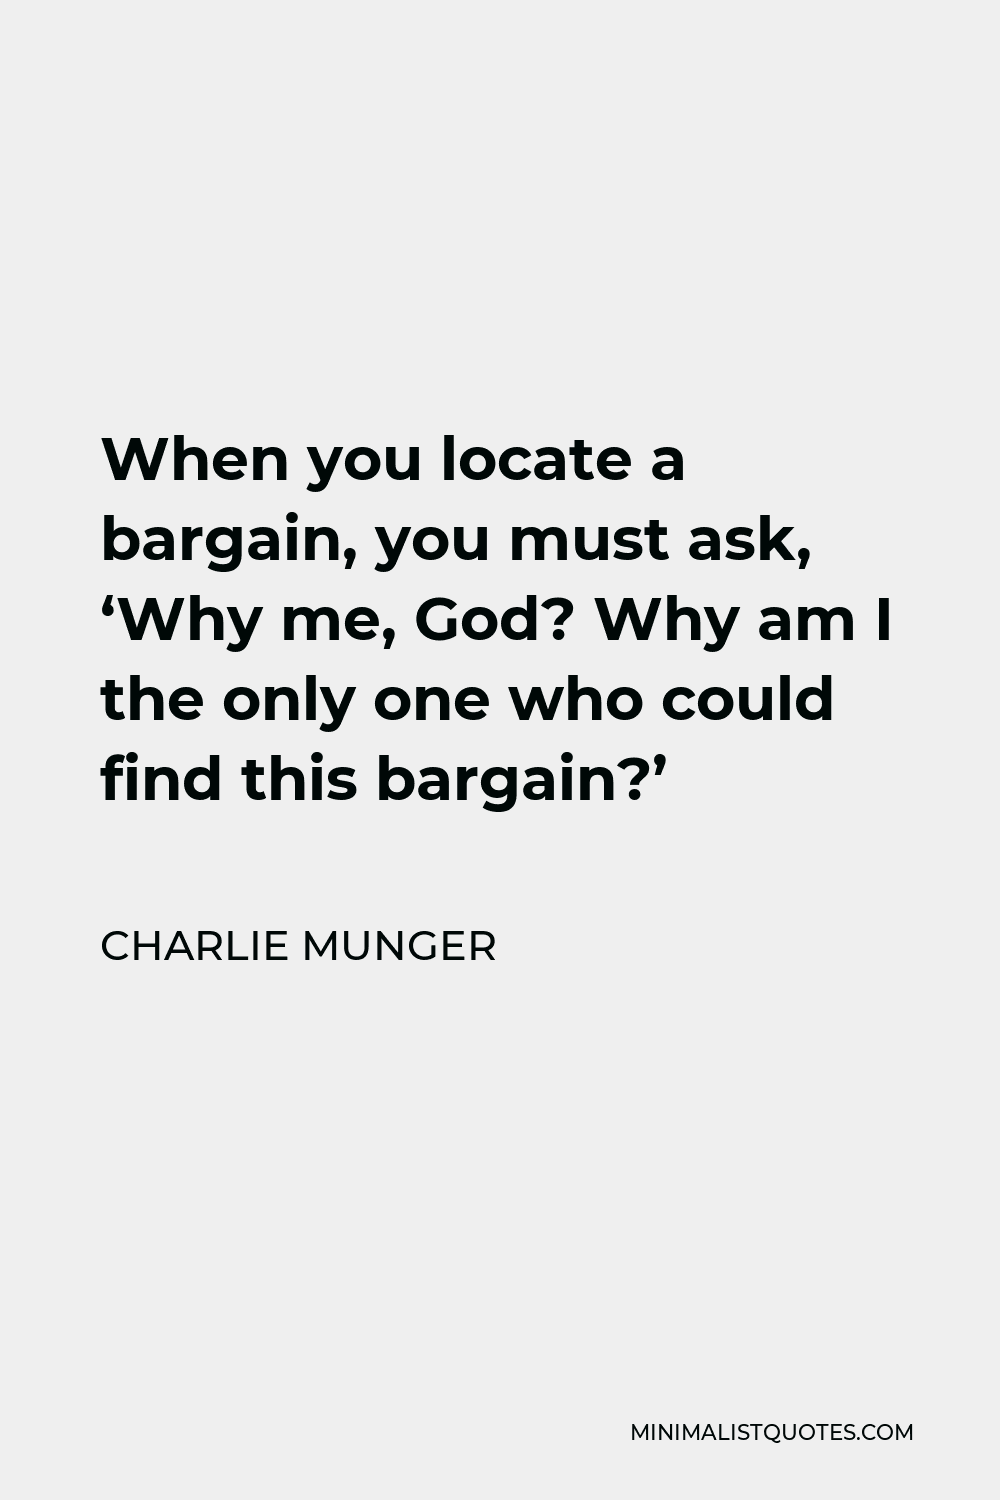 Charlie Munger Quote - When you locate a bargain, you must ask, ‘Why me, God? Why am I the only one who could find this bargain?’